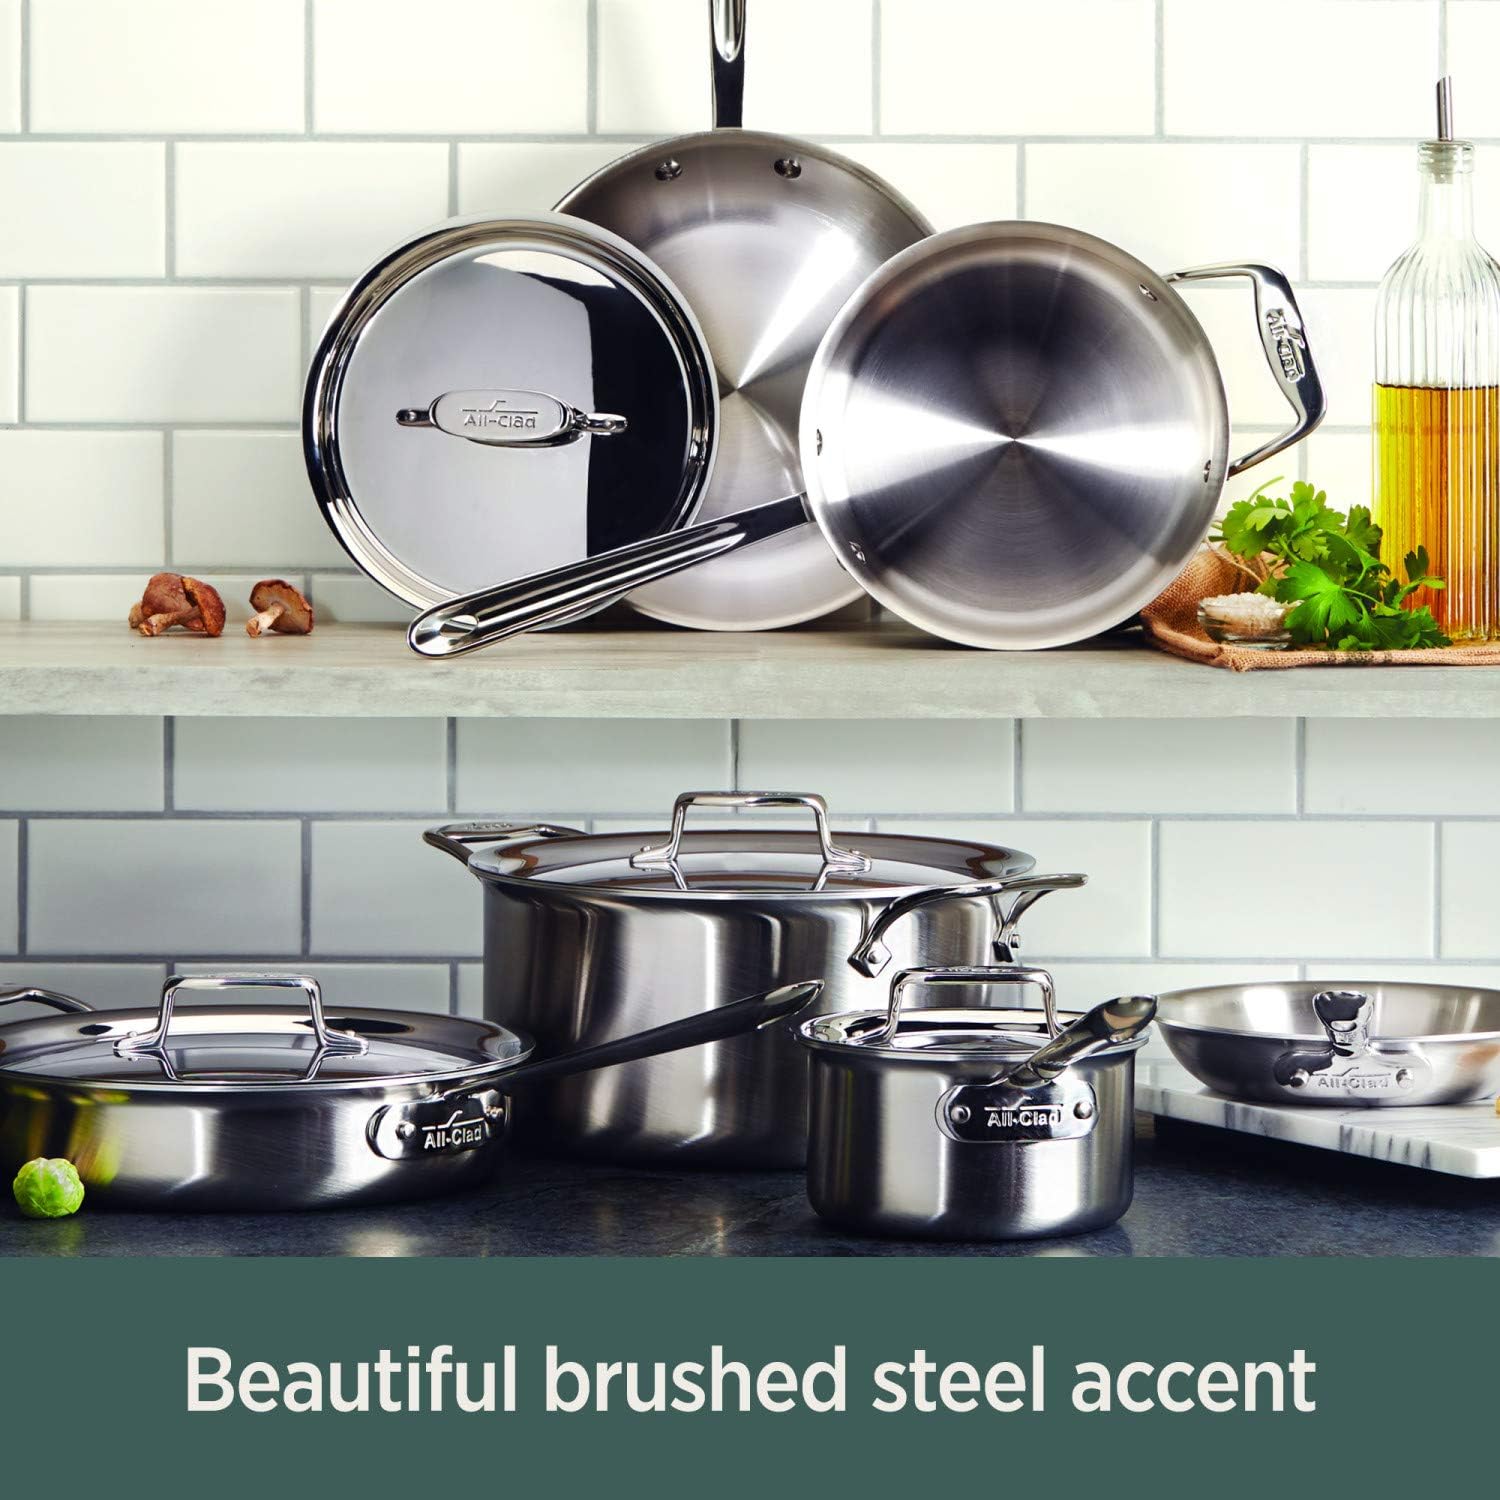 All-Clad Stainless Steel 3-Quart Sauce Pan with Lid